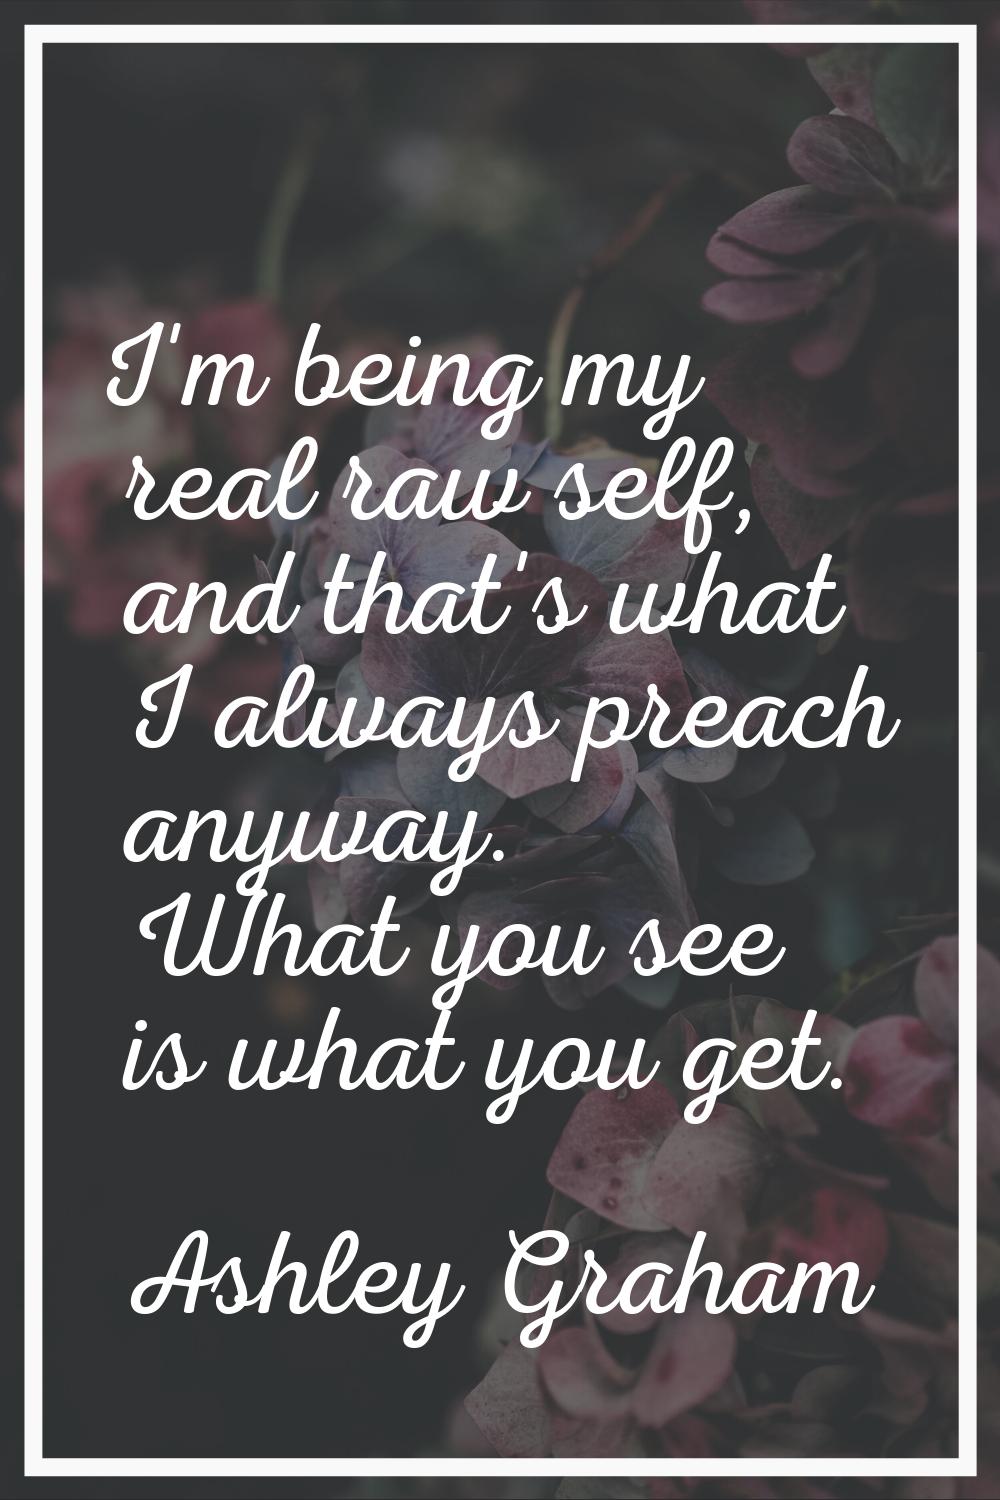 I'm being my real raw self, and that's what I always preach anyway. What you see is what you get.